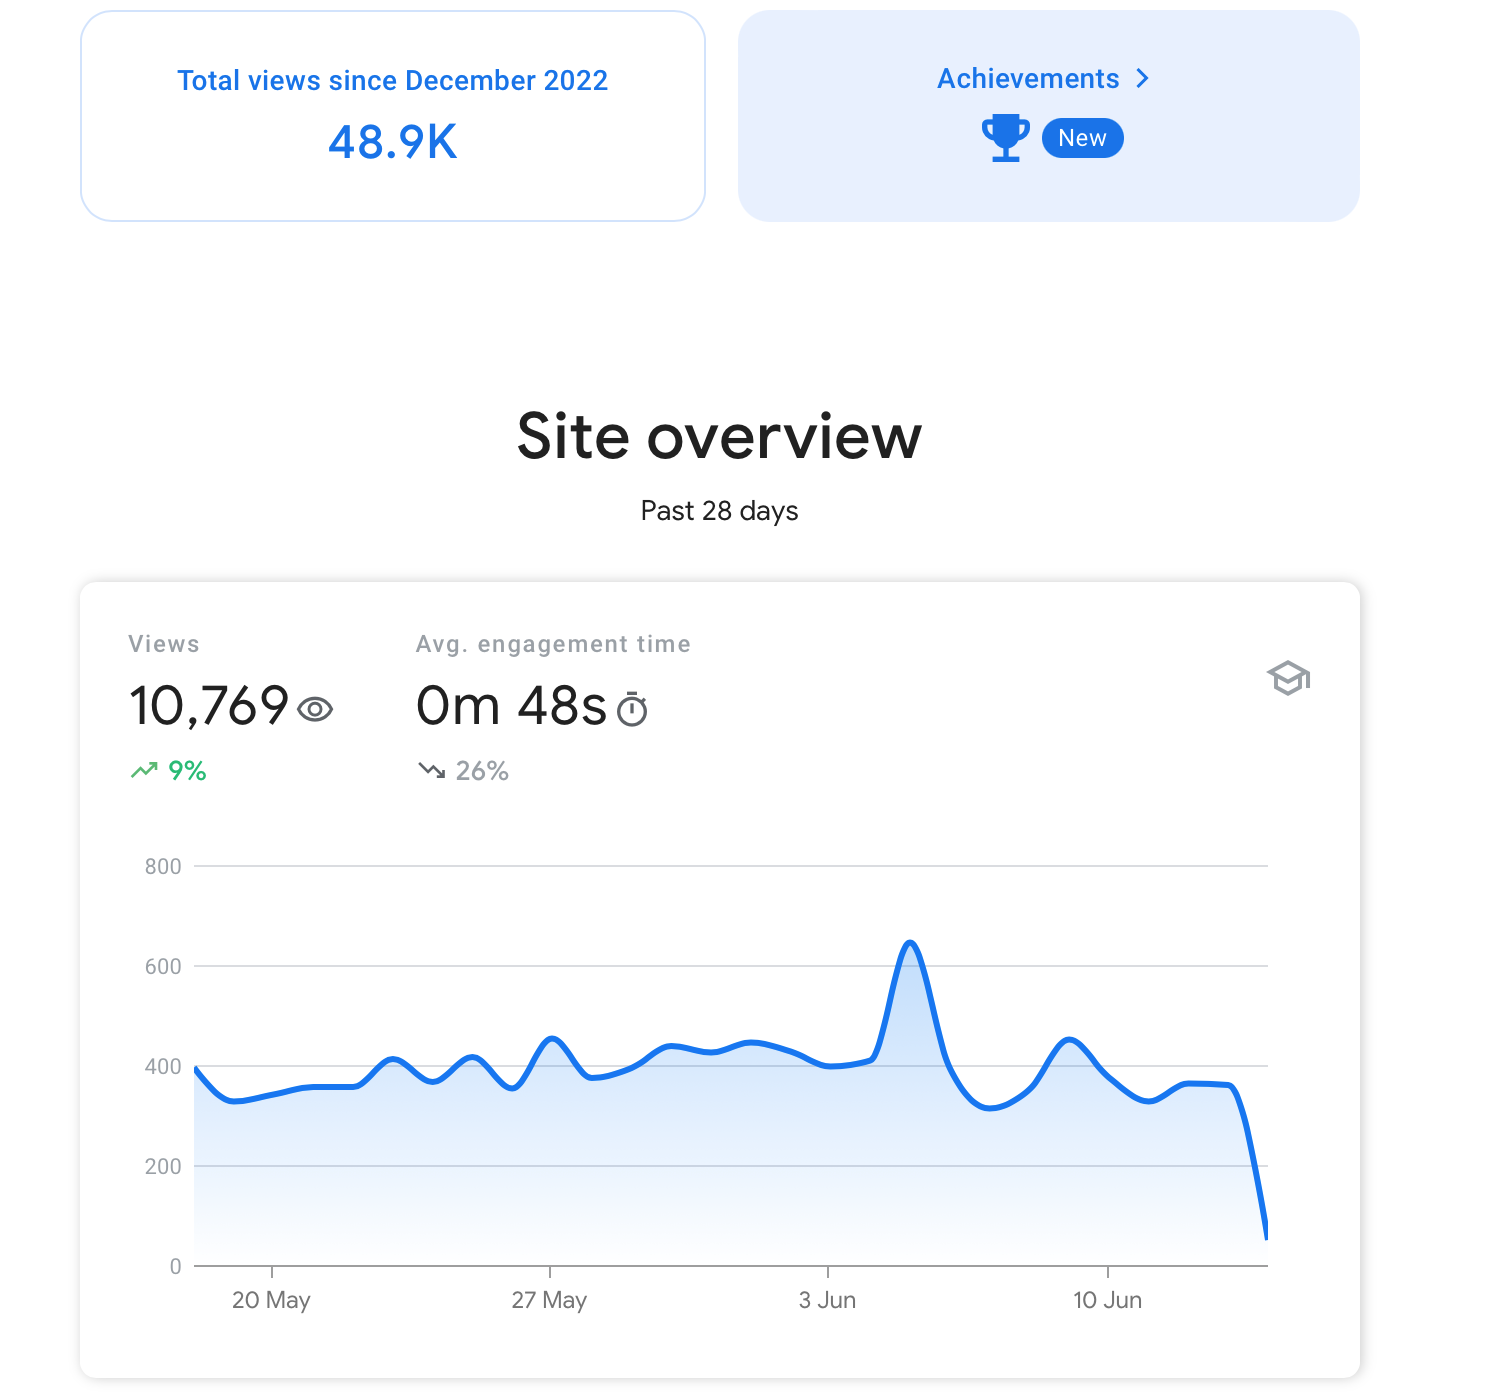 google search console overview